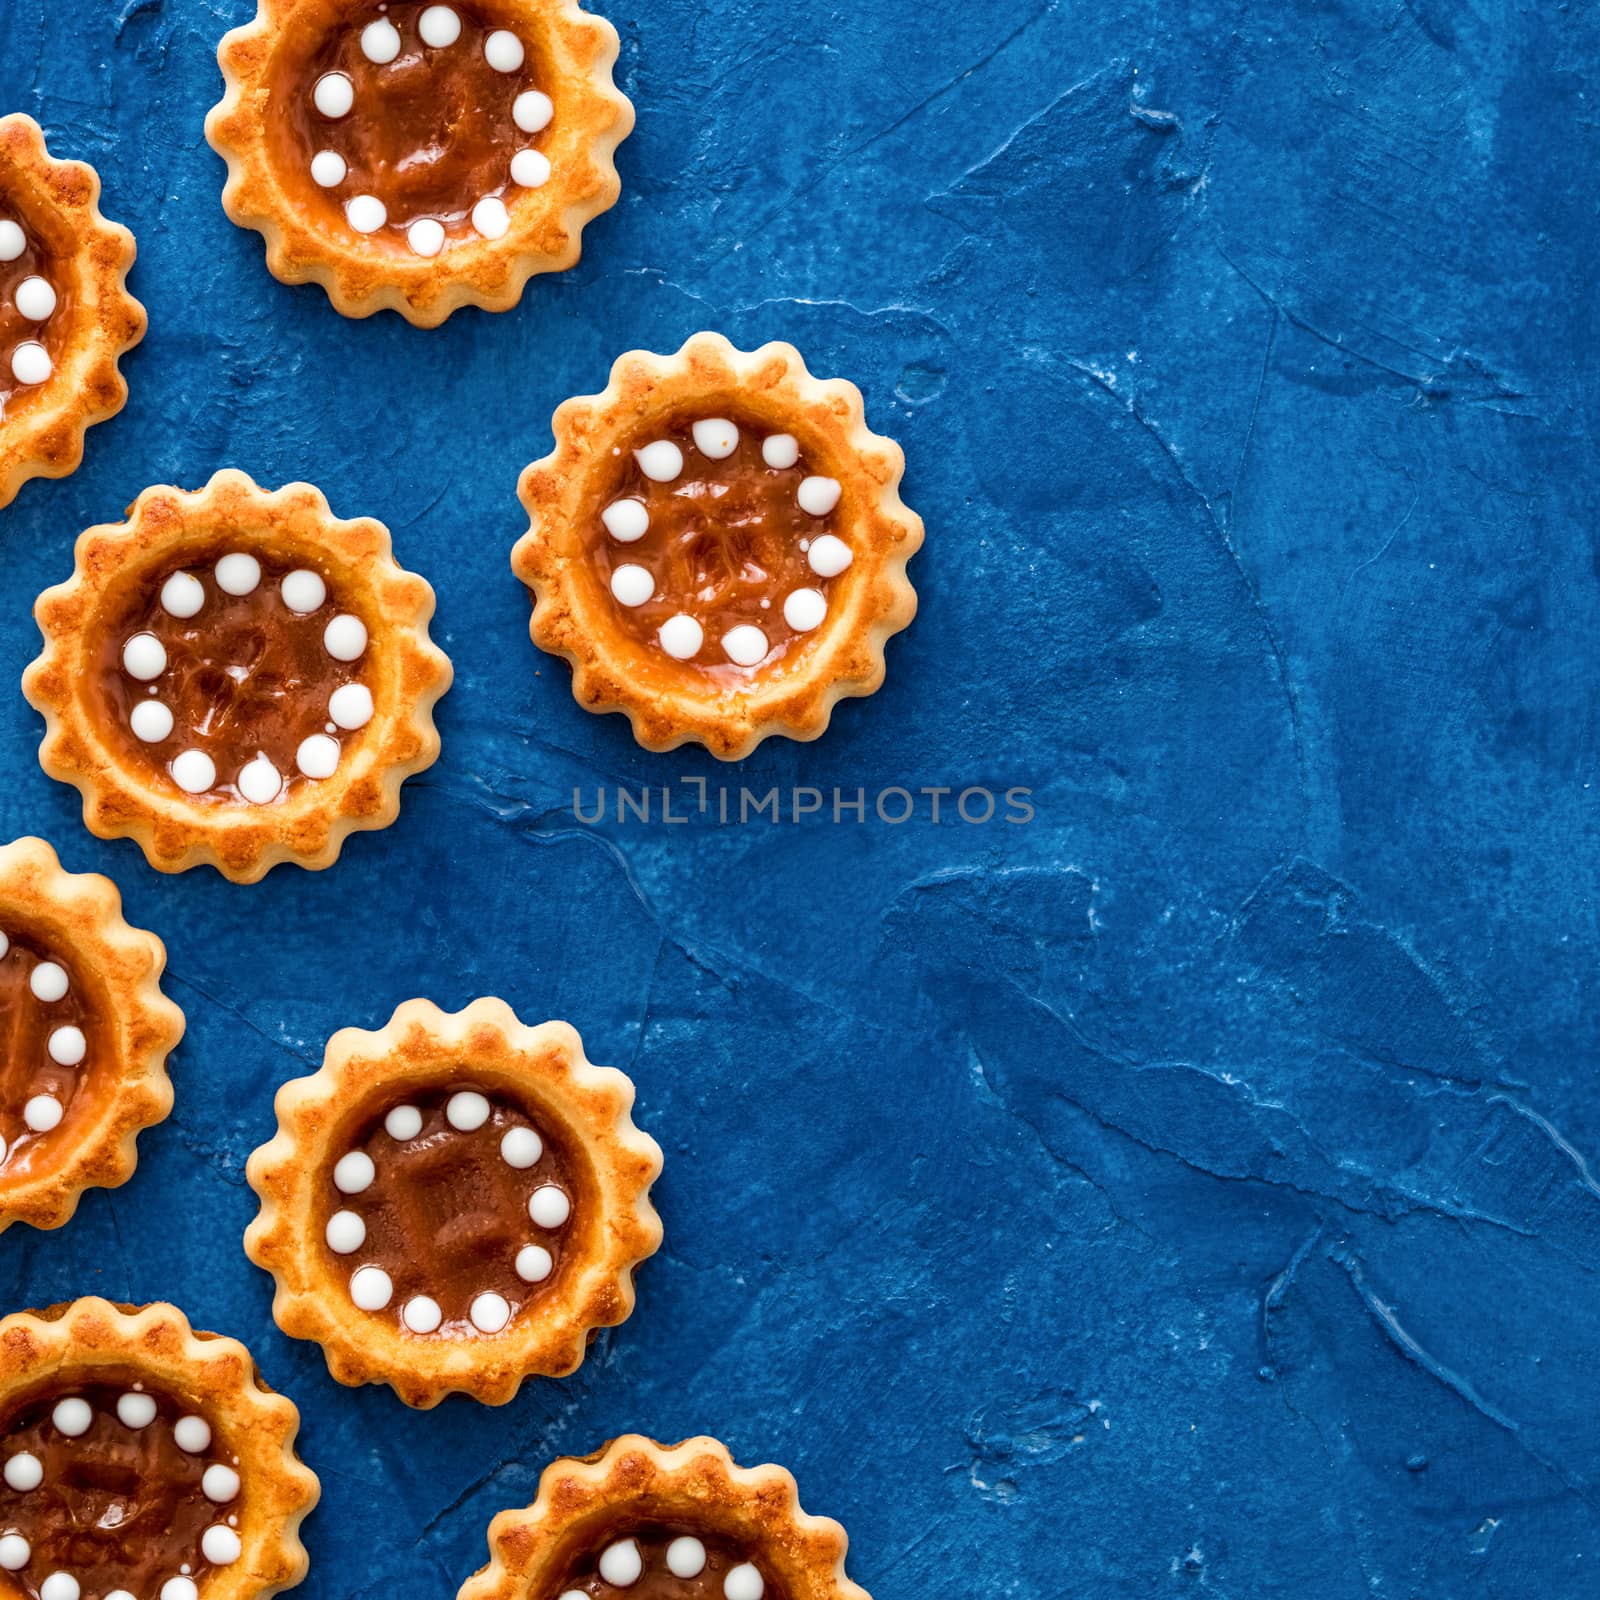 Cookies with caramel on trendy blue color 2020 textured background. Top view or flat lay. Color of 2020 food background and concept with copy space. Square